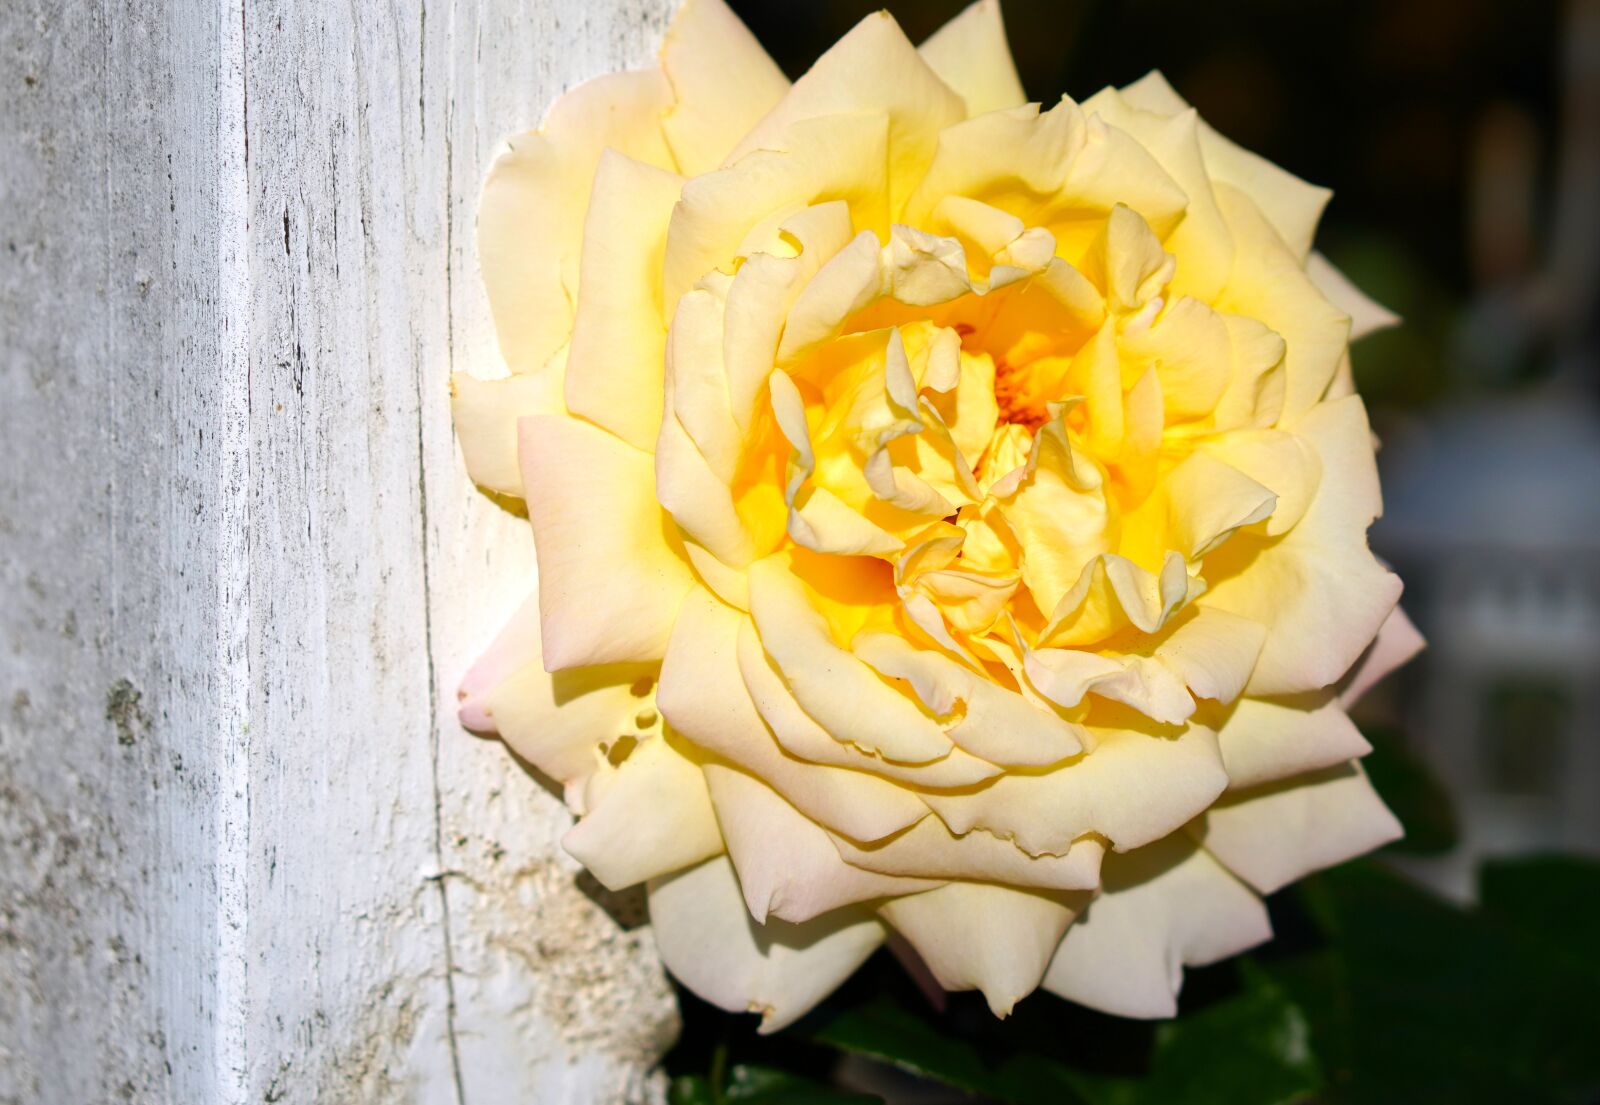 Sony a6400 sample photo. Flower, yellow, rose photography